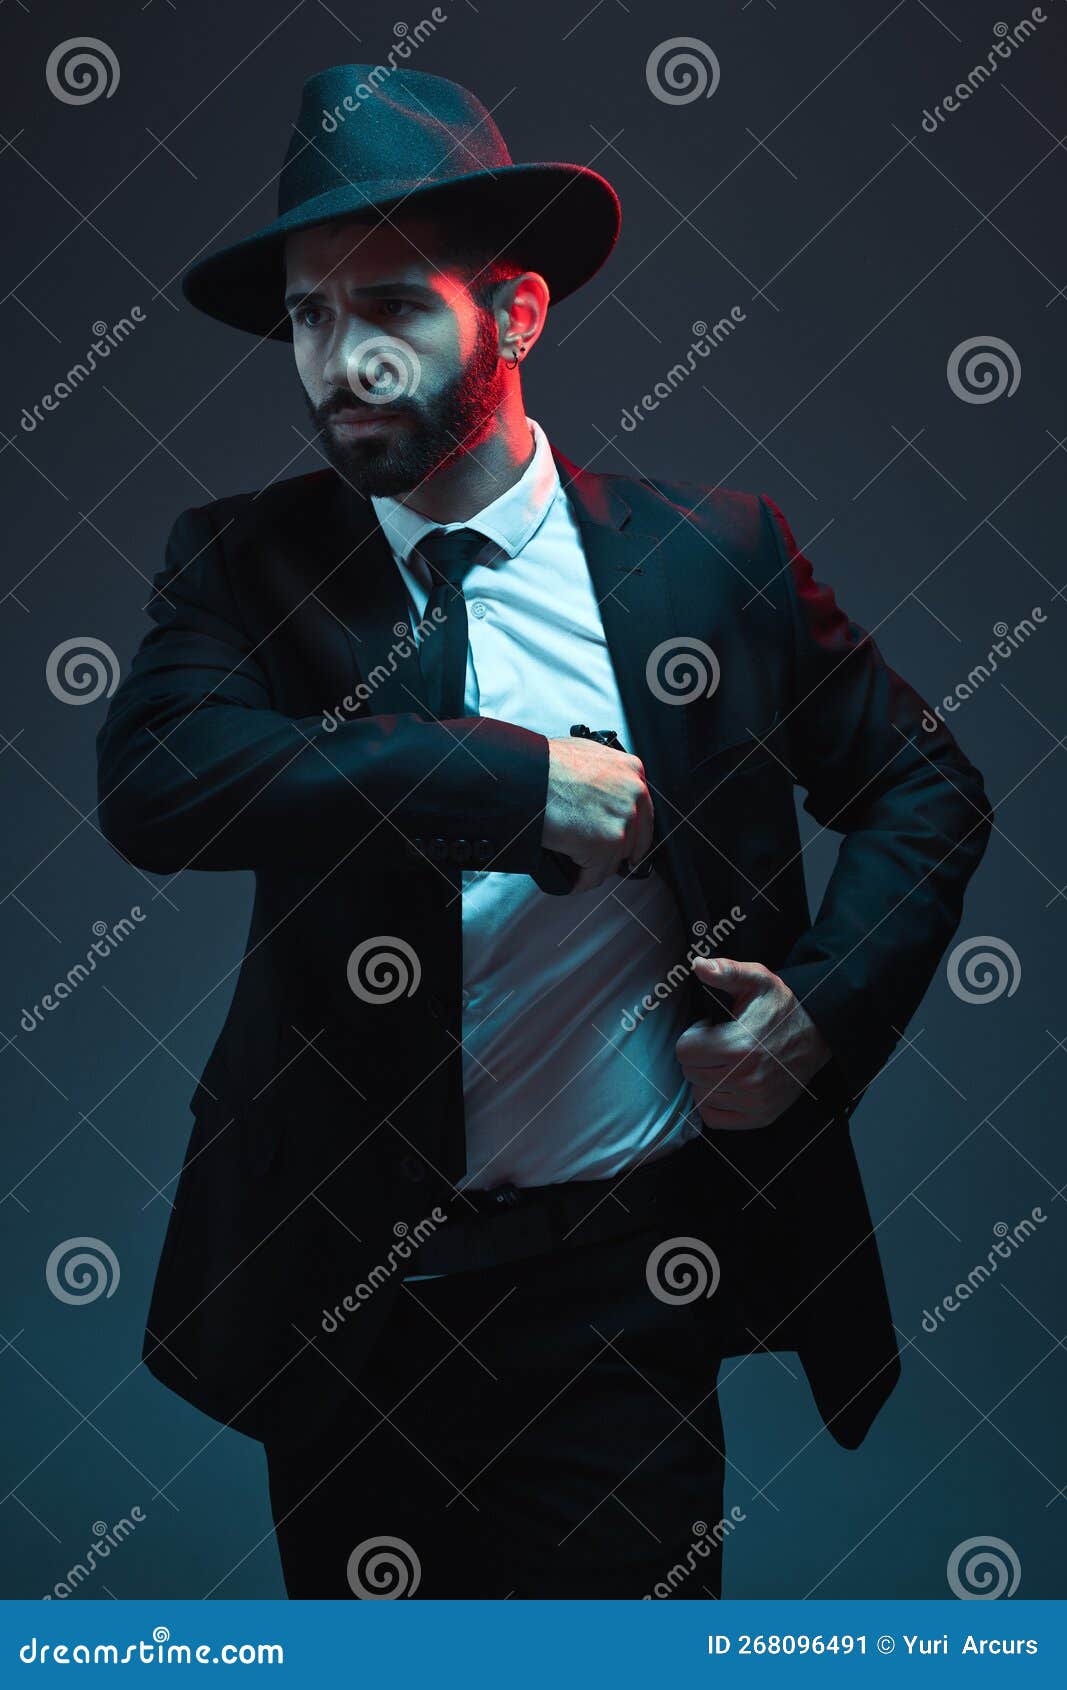 https://thumbs.dreamstime.com/z/mafia-gangster-man-classy-suit-security-business-isolated-dark-background-fashion-detective-professional-268096491.jpg